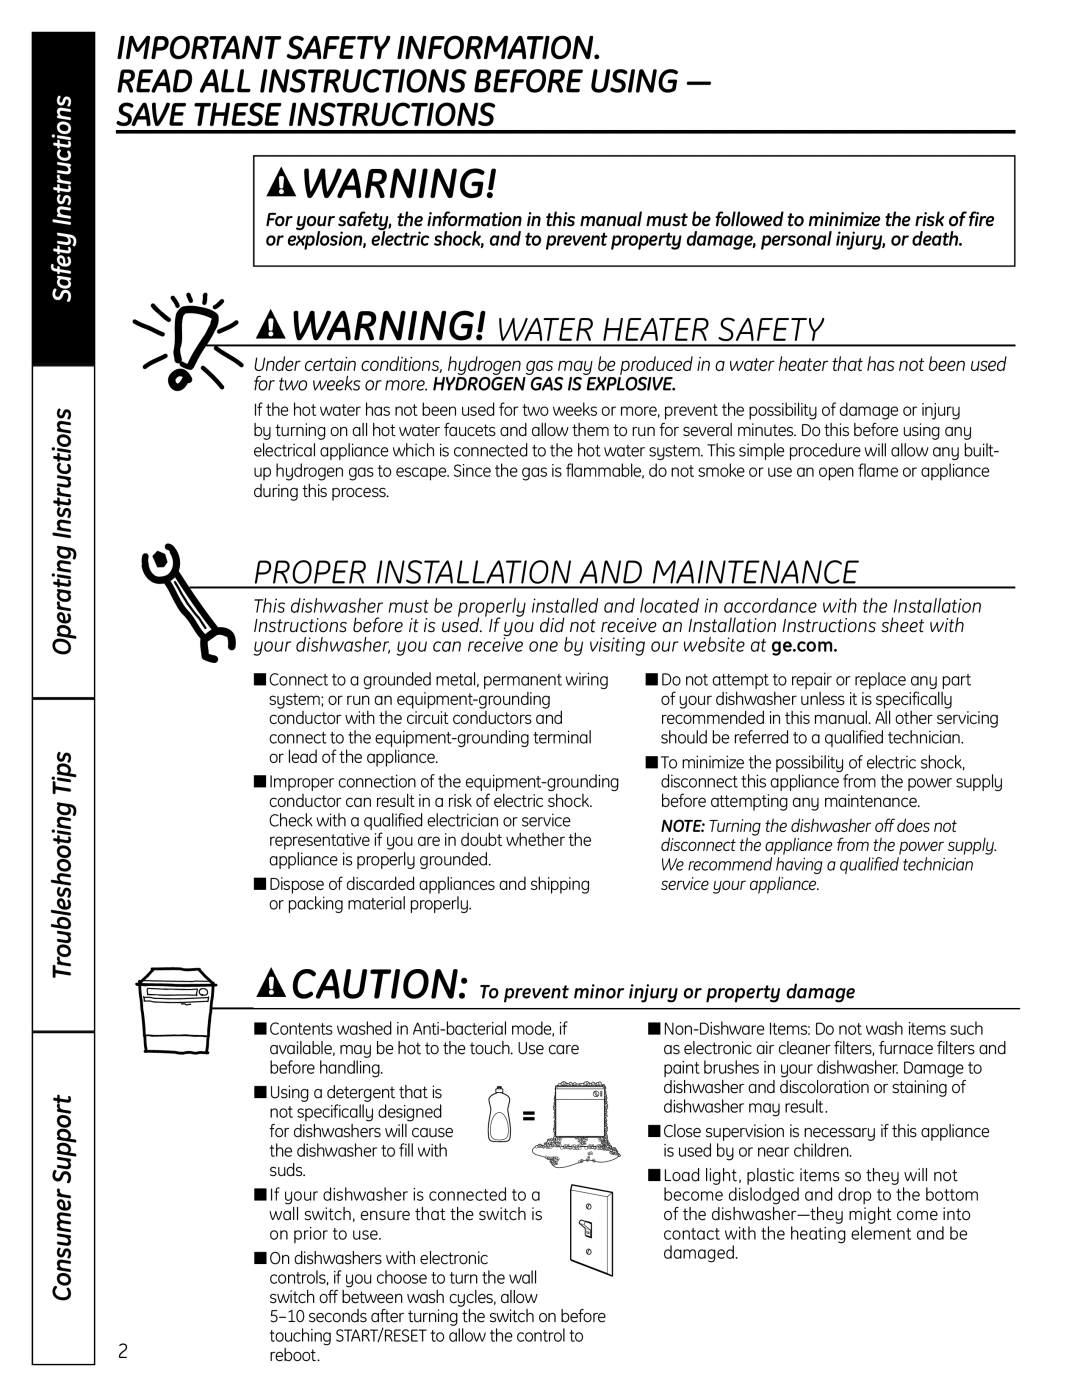 GE PDW8000 Series manual Important Safety Information, Read All Instructions Before Using, Save These Instructions 